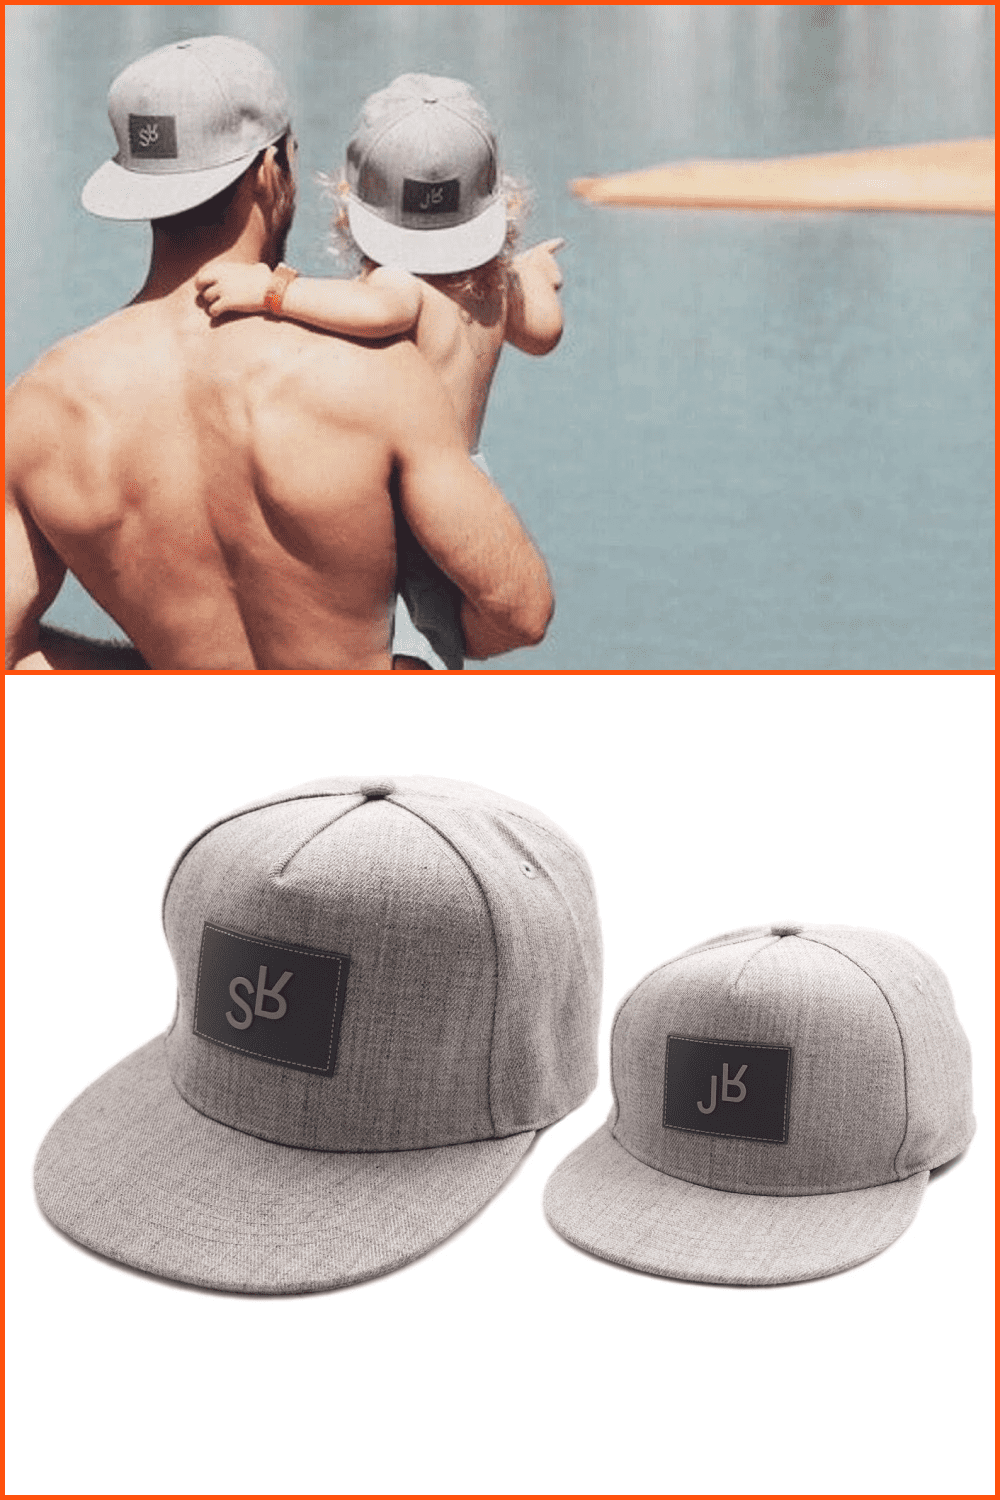 Father and Son Hats.